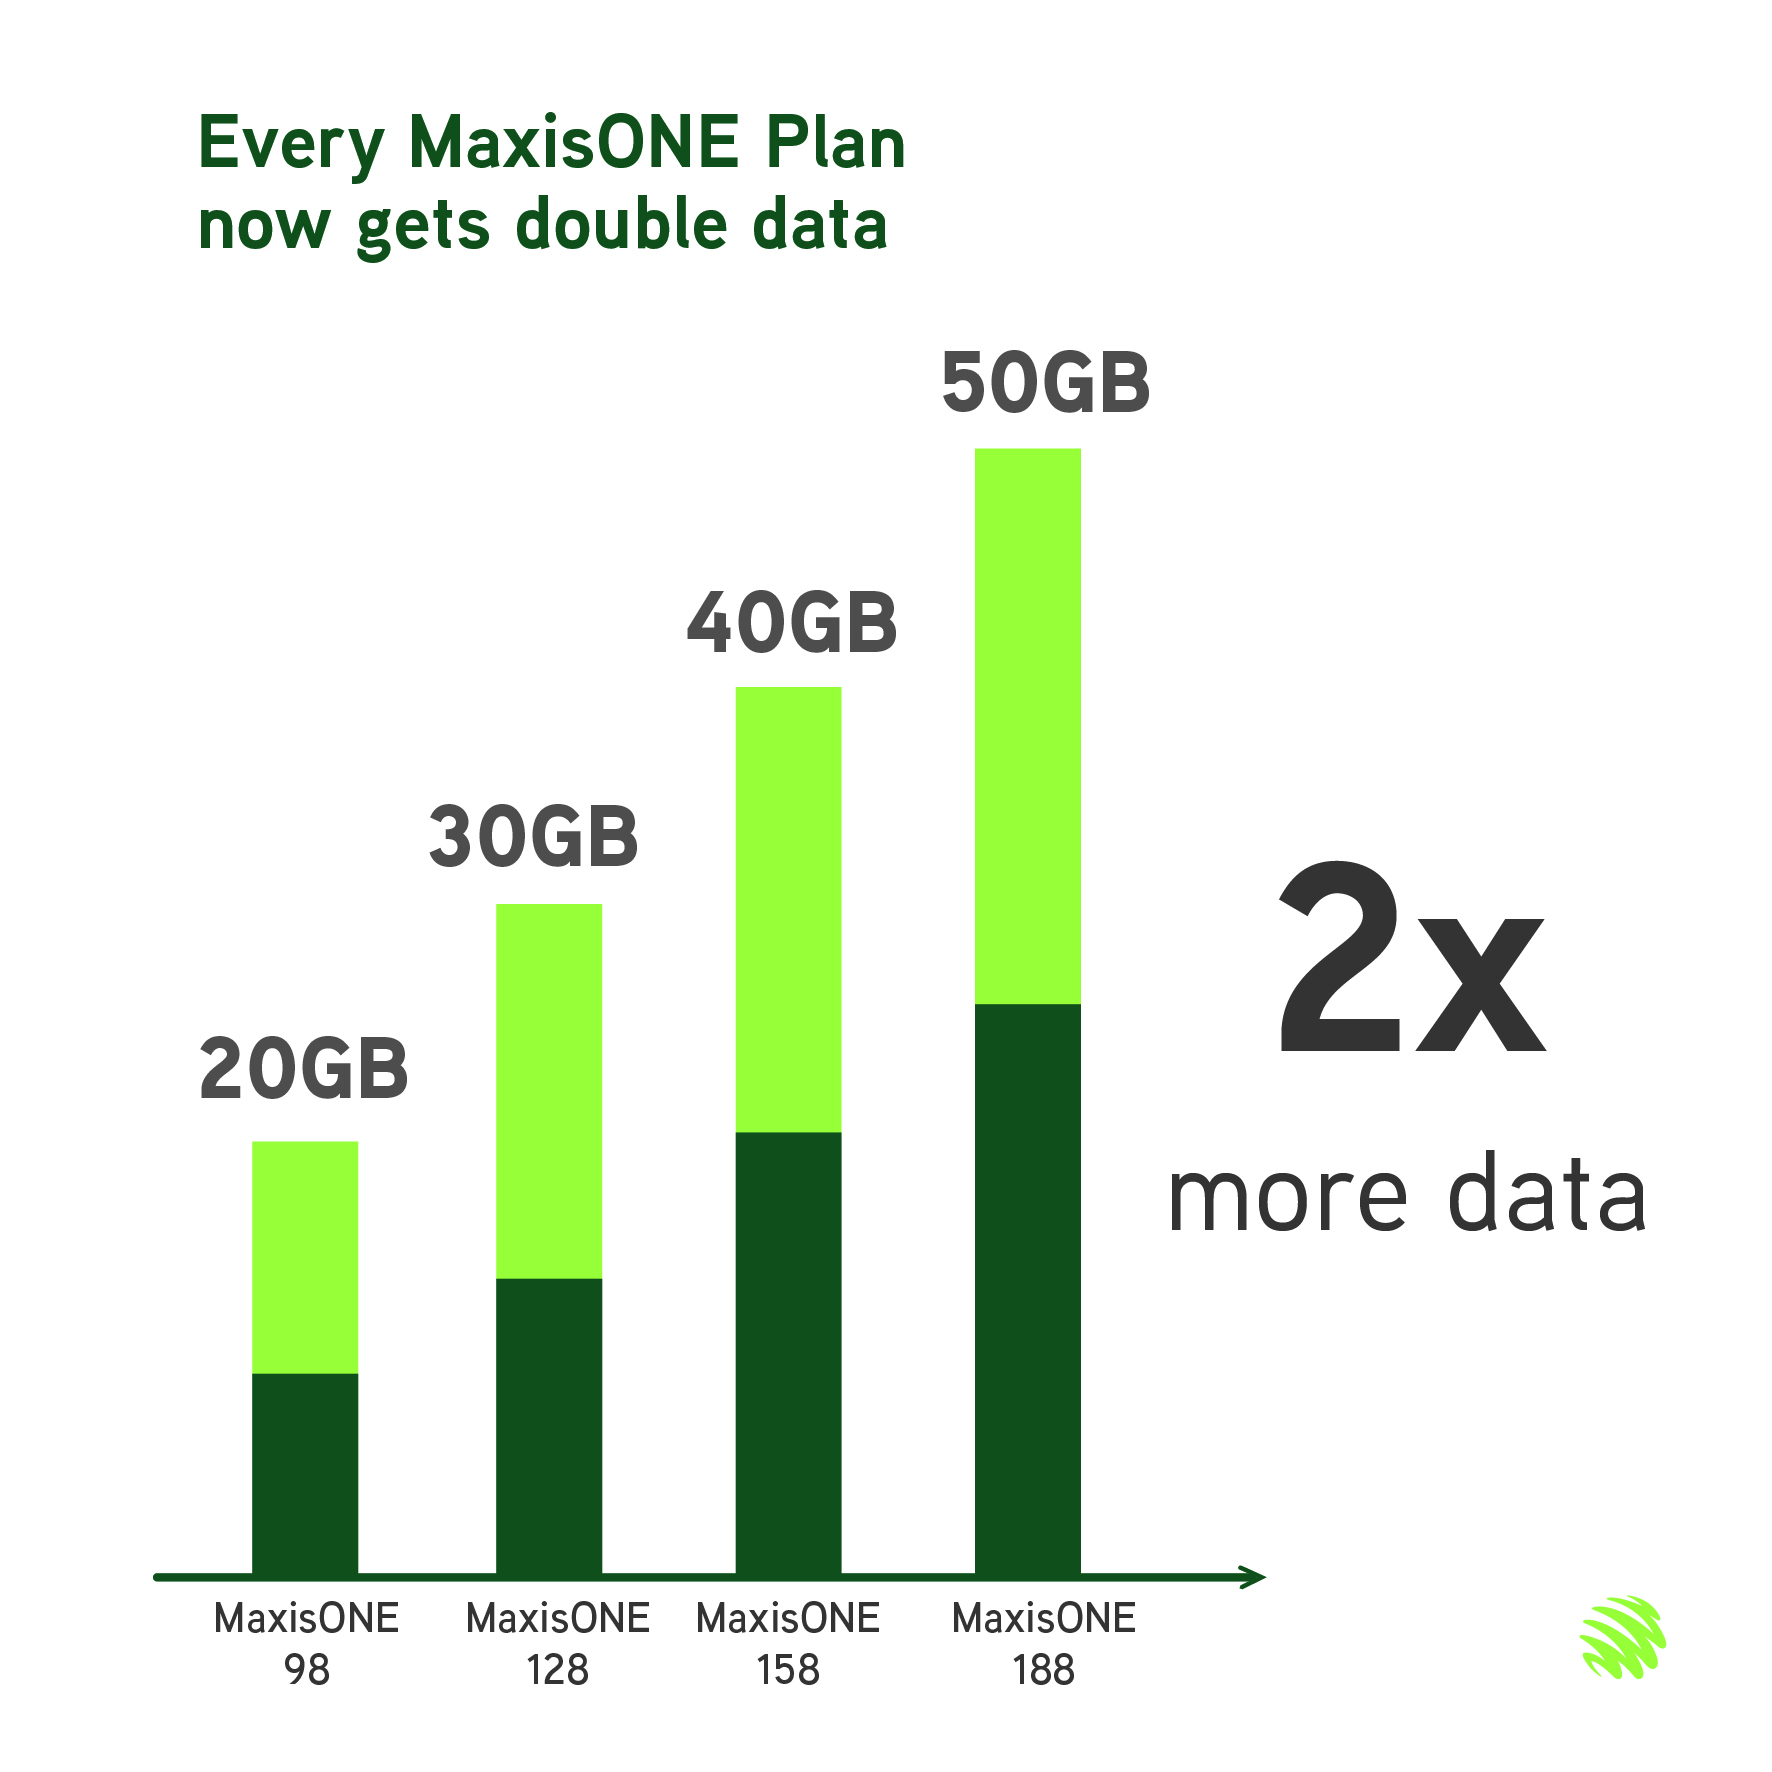 MaxisONE plan customers will get double data upgrade